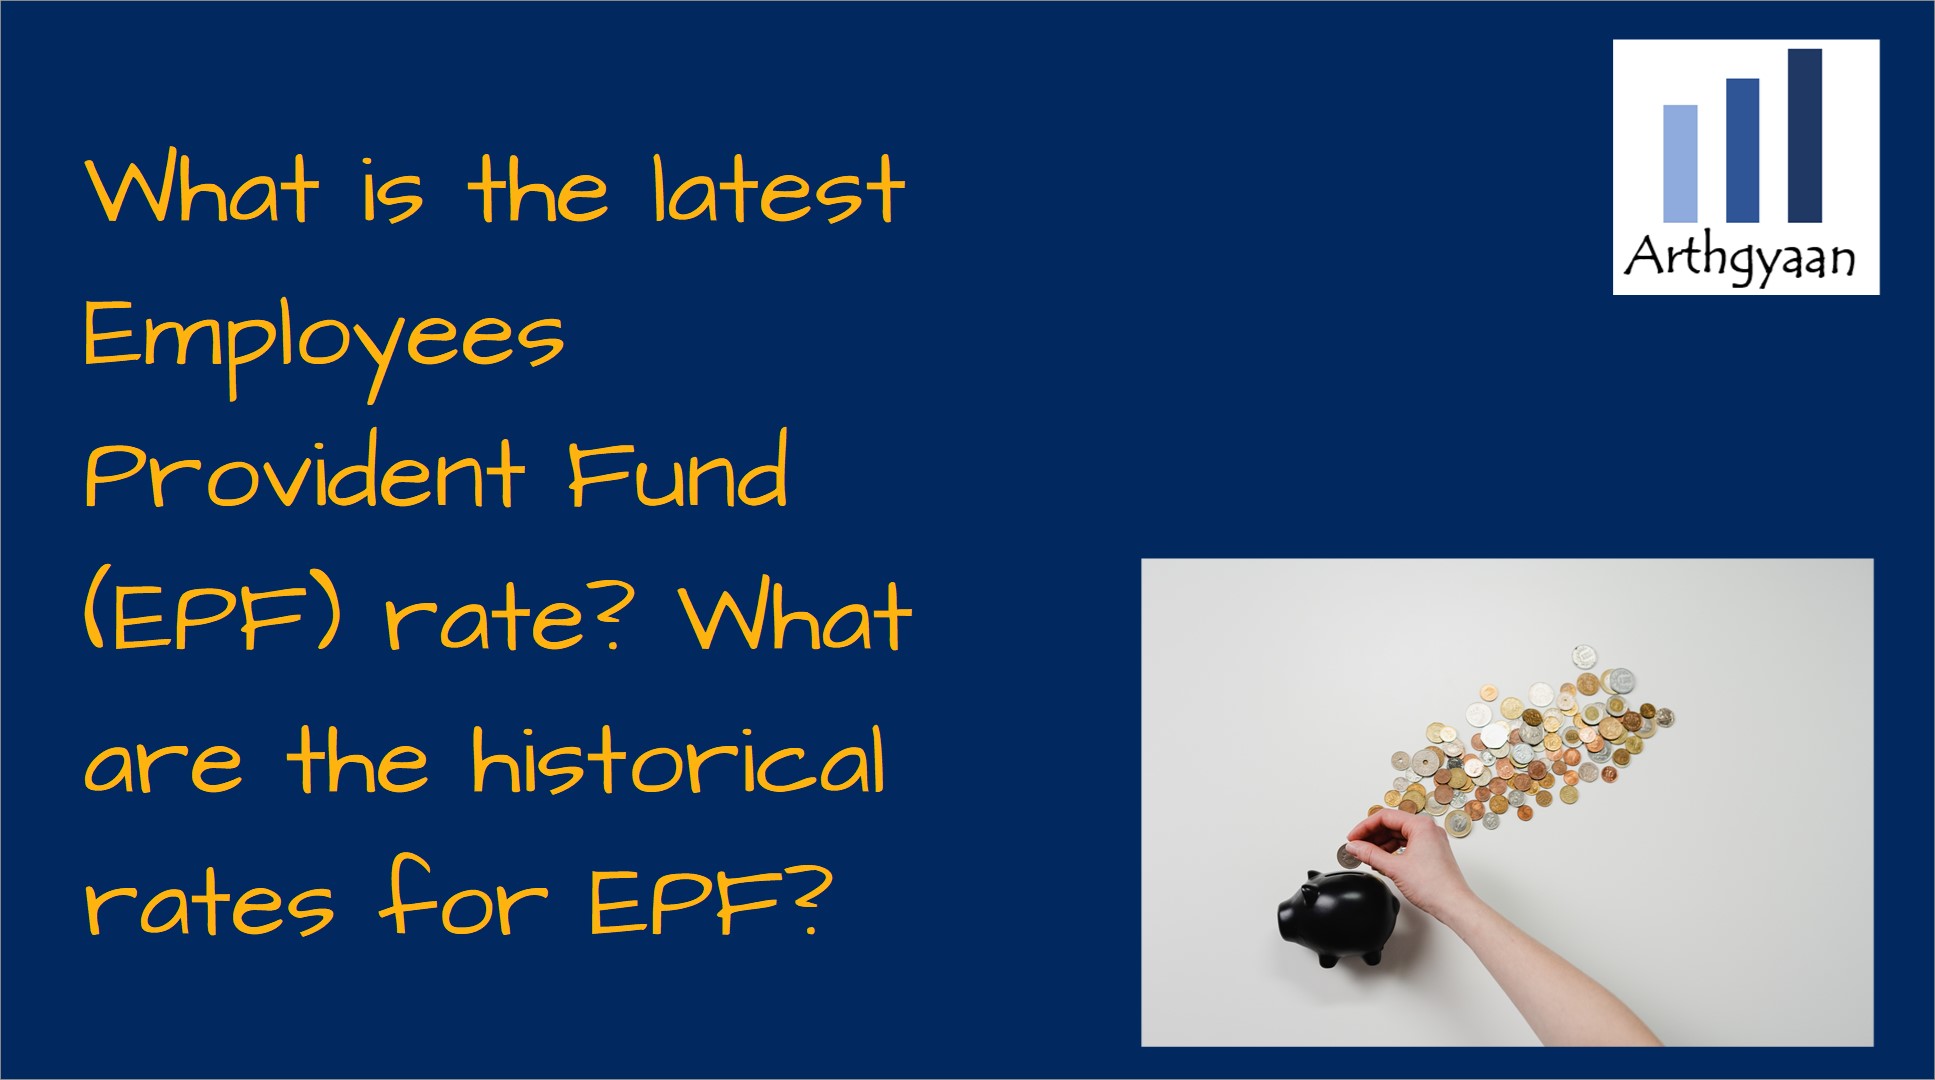 <p>This article gives you the current and historical interest rates for EPF so that you can track how the rate has moved since the 1950s.</p>

